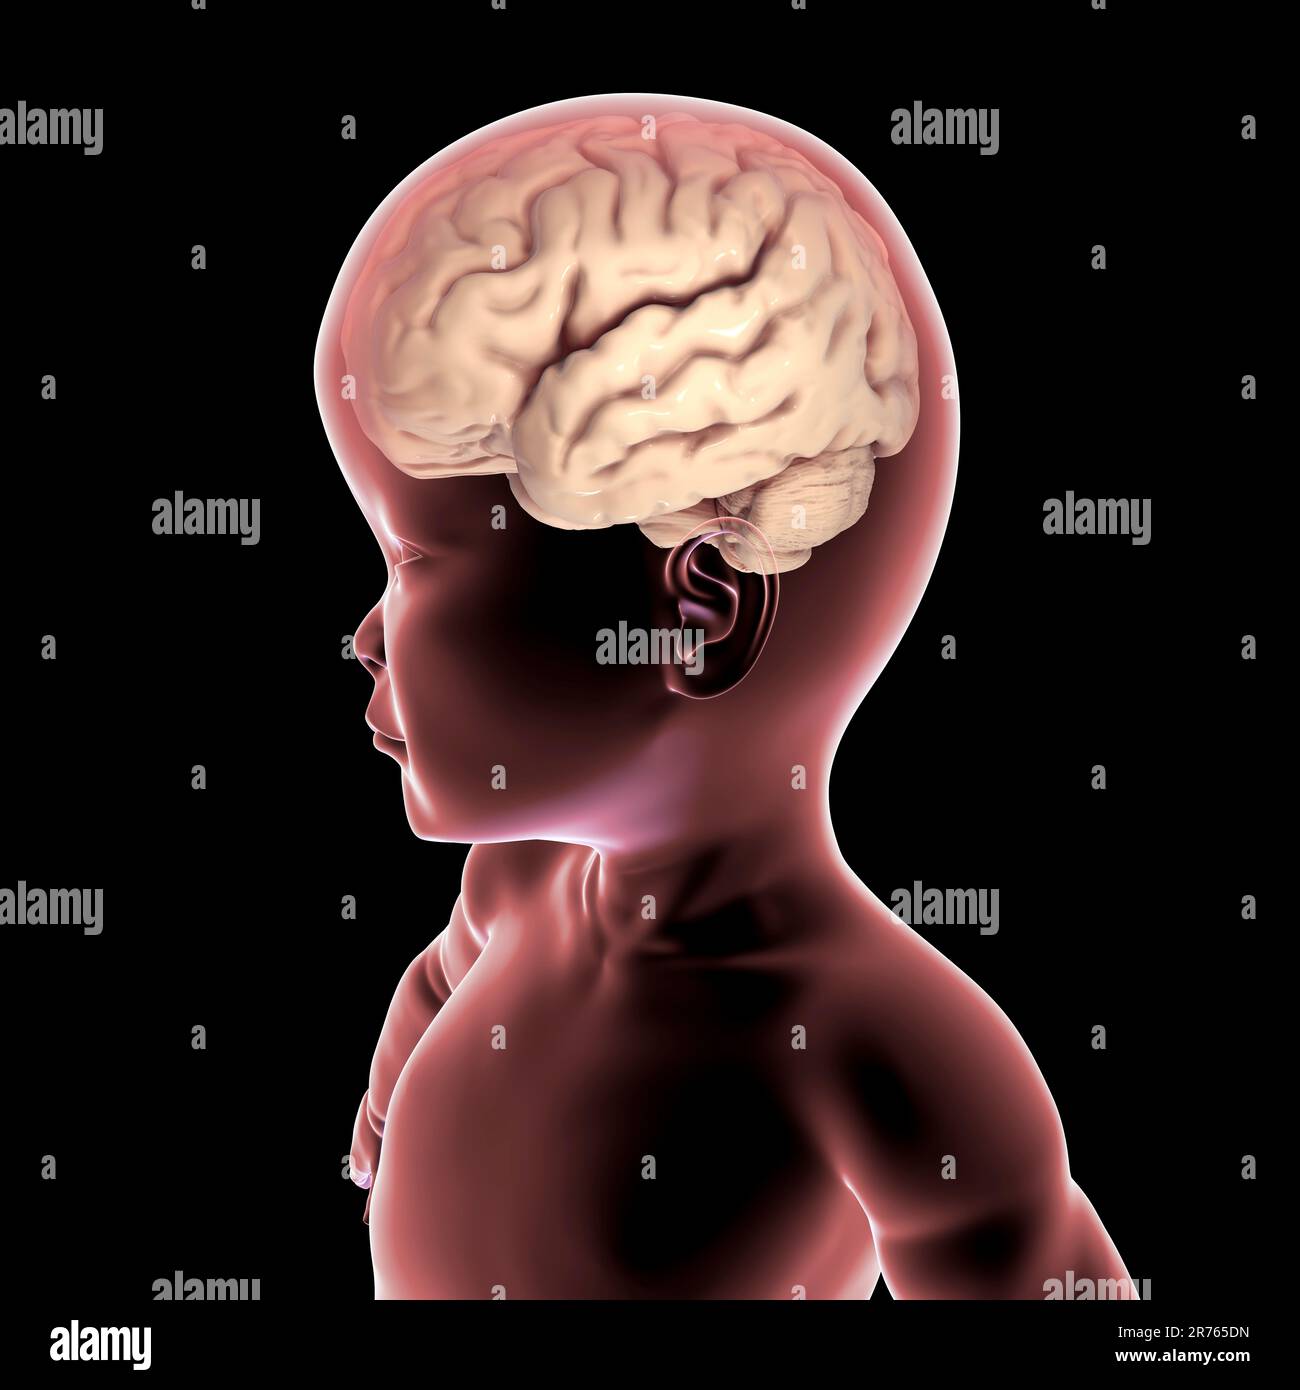 A child with macrocephaly, enlarged brain, hypotony, mental and motor delay due to genetic disorder, computer illustration. Stock Photo